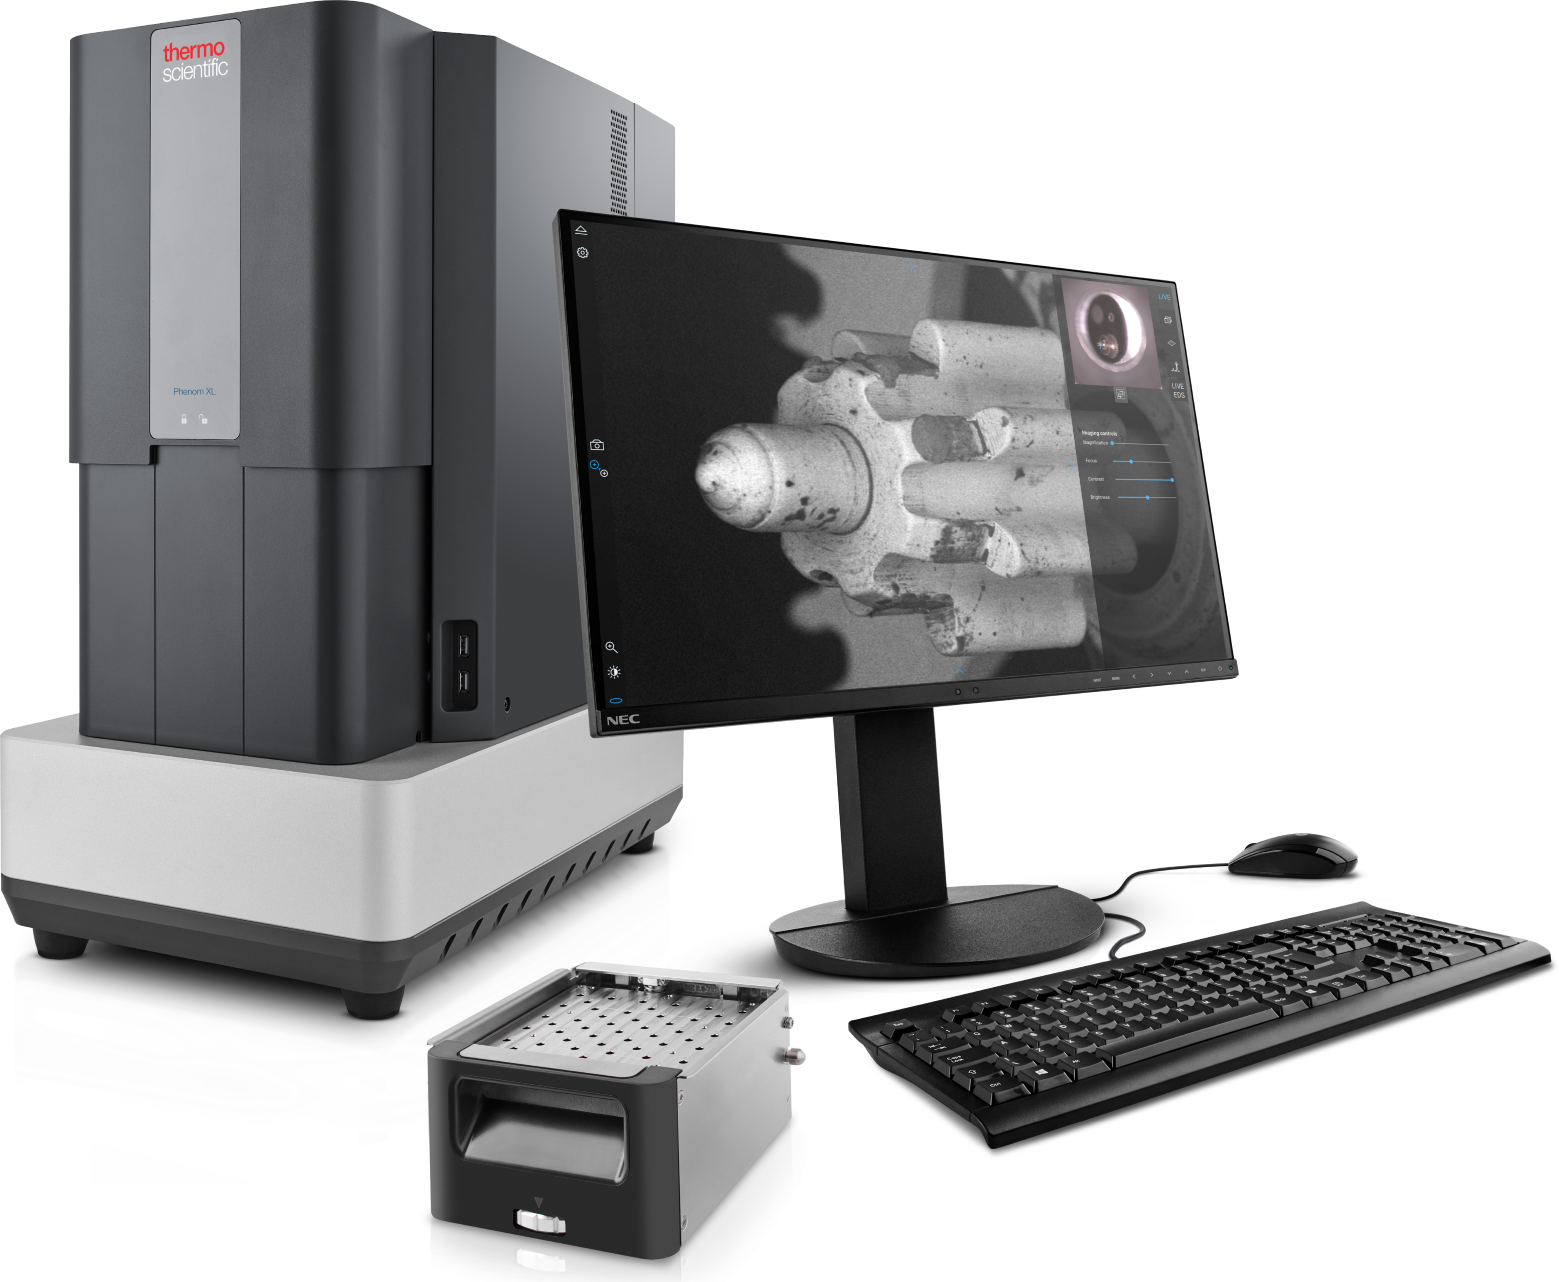 The Phenom XL G2 Desktop SEM offers a versatile solution for automating the quality control process.